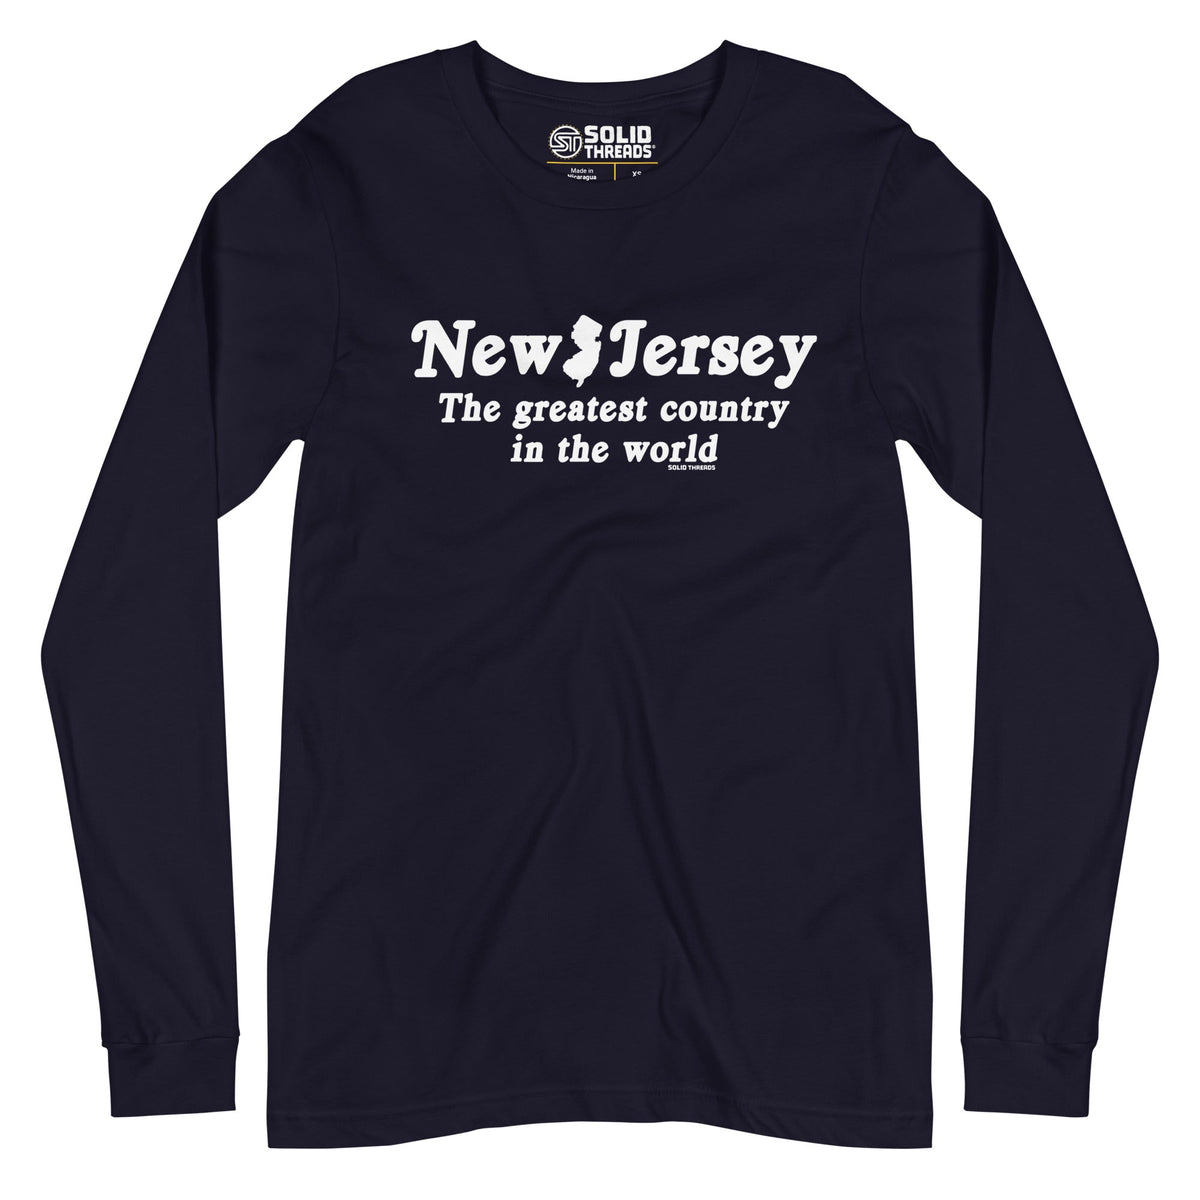 New Jersey The Greatest Country In The World Vintage Navy Long Sleeve T Shirt | Funny Garden State Graphic Tee | Solid Threads